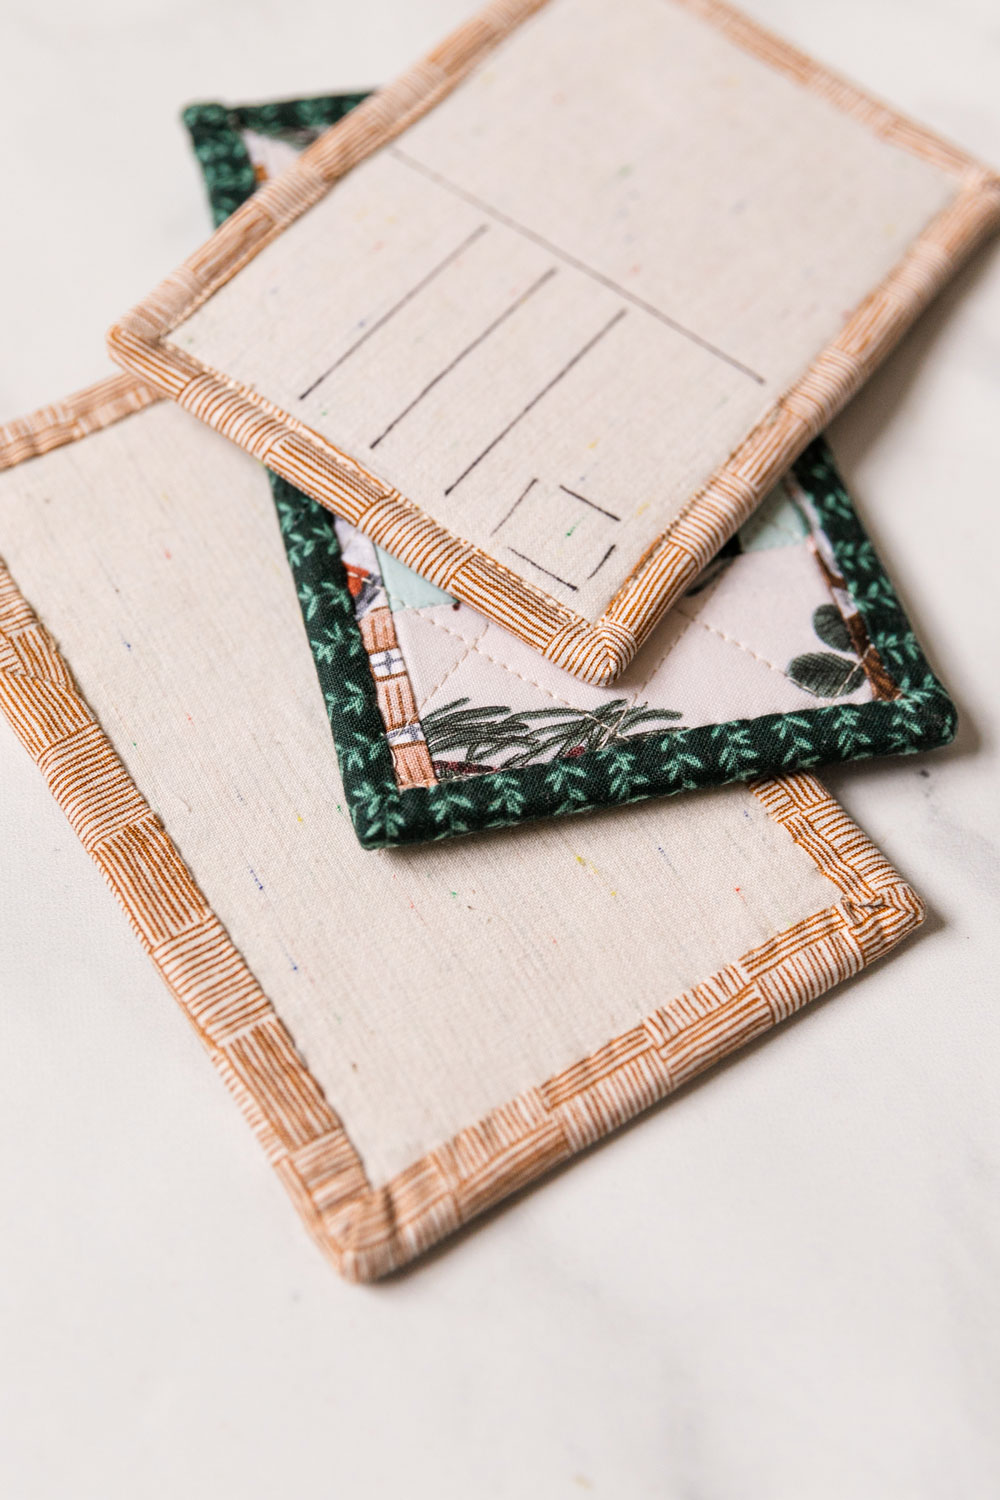 This beginner friendly quilted postcard tutorial is so fun for the holidays! Sew and send handmade notes to your friends! suzyquilts.com #sewingtutorial